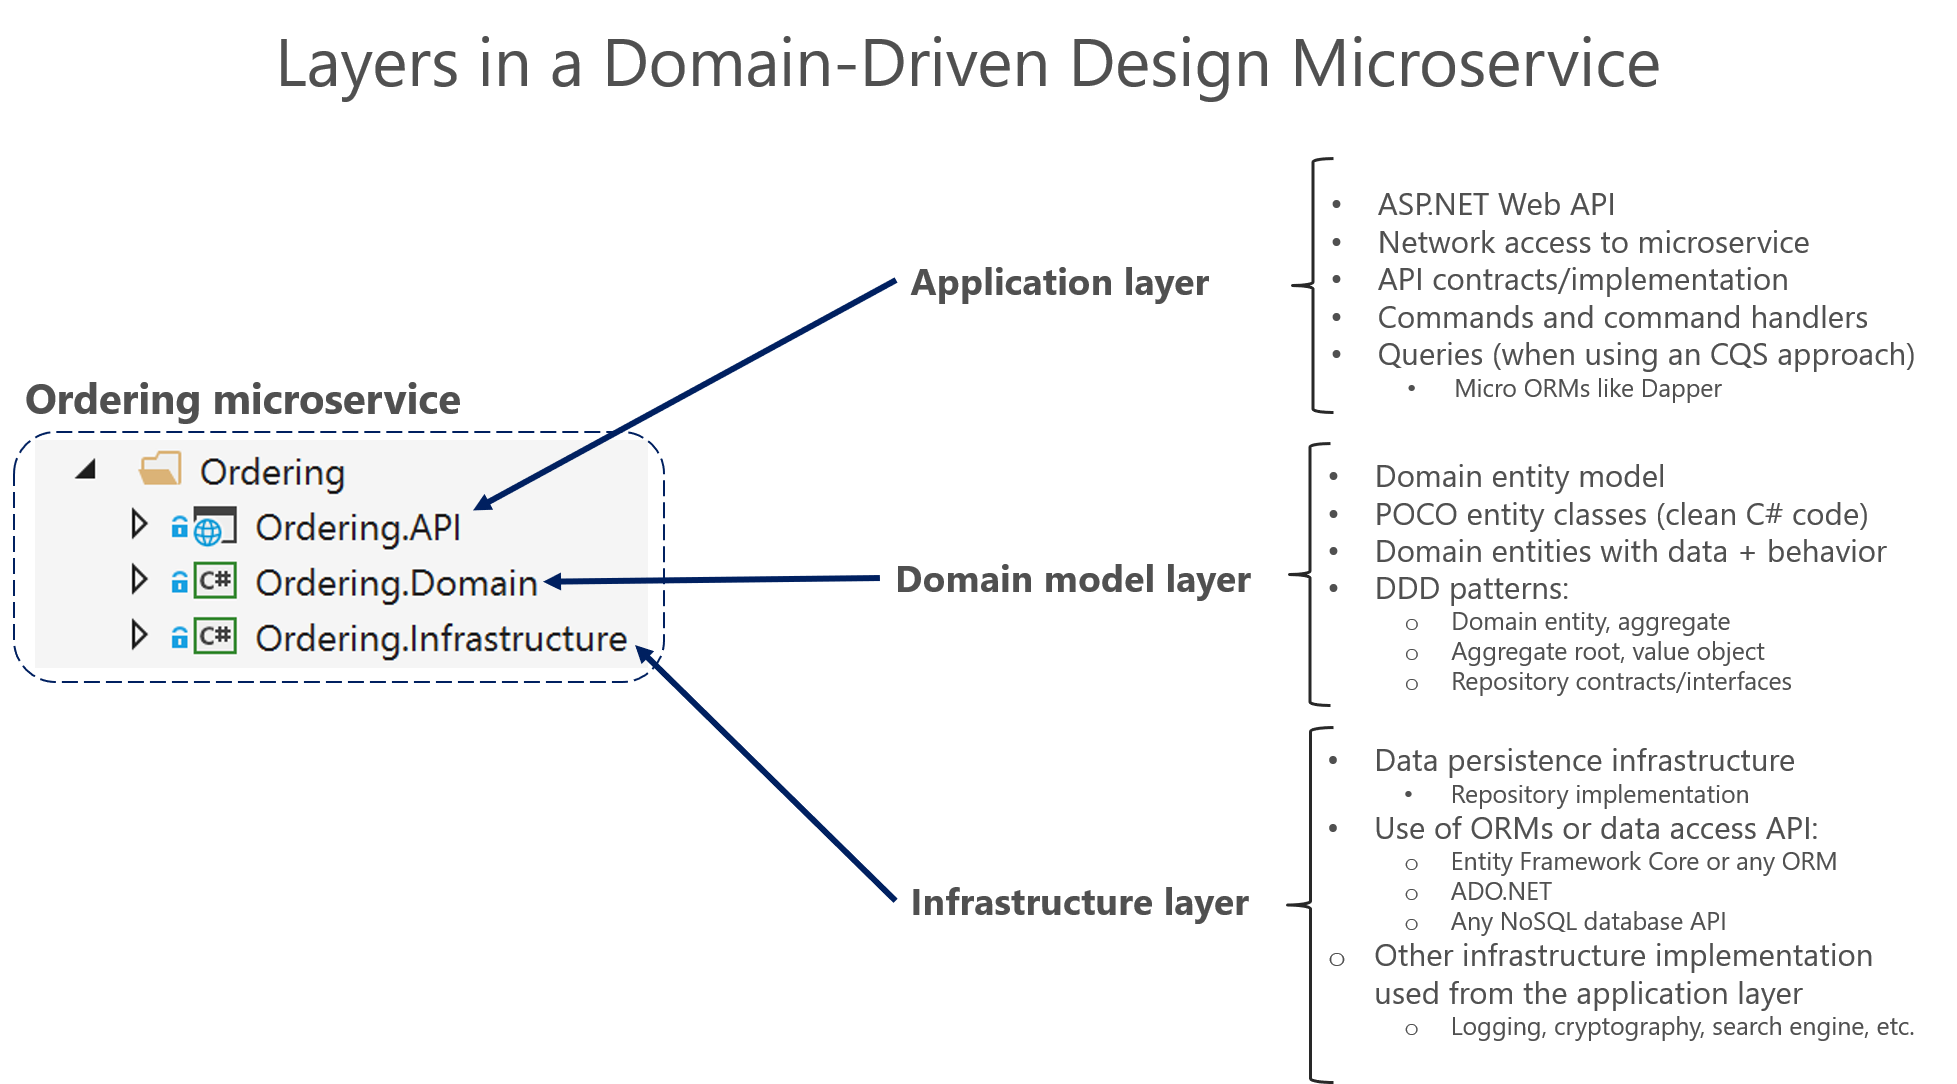 Diagram showing the layers in a domain-driven design microservice.